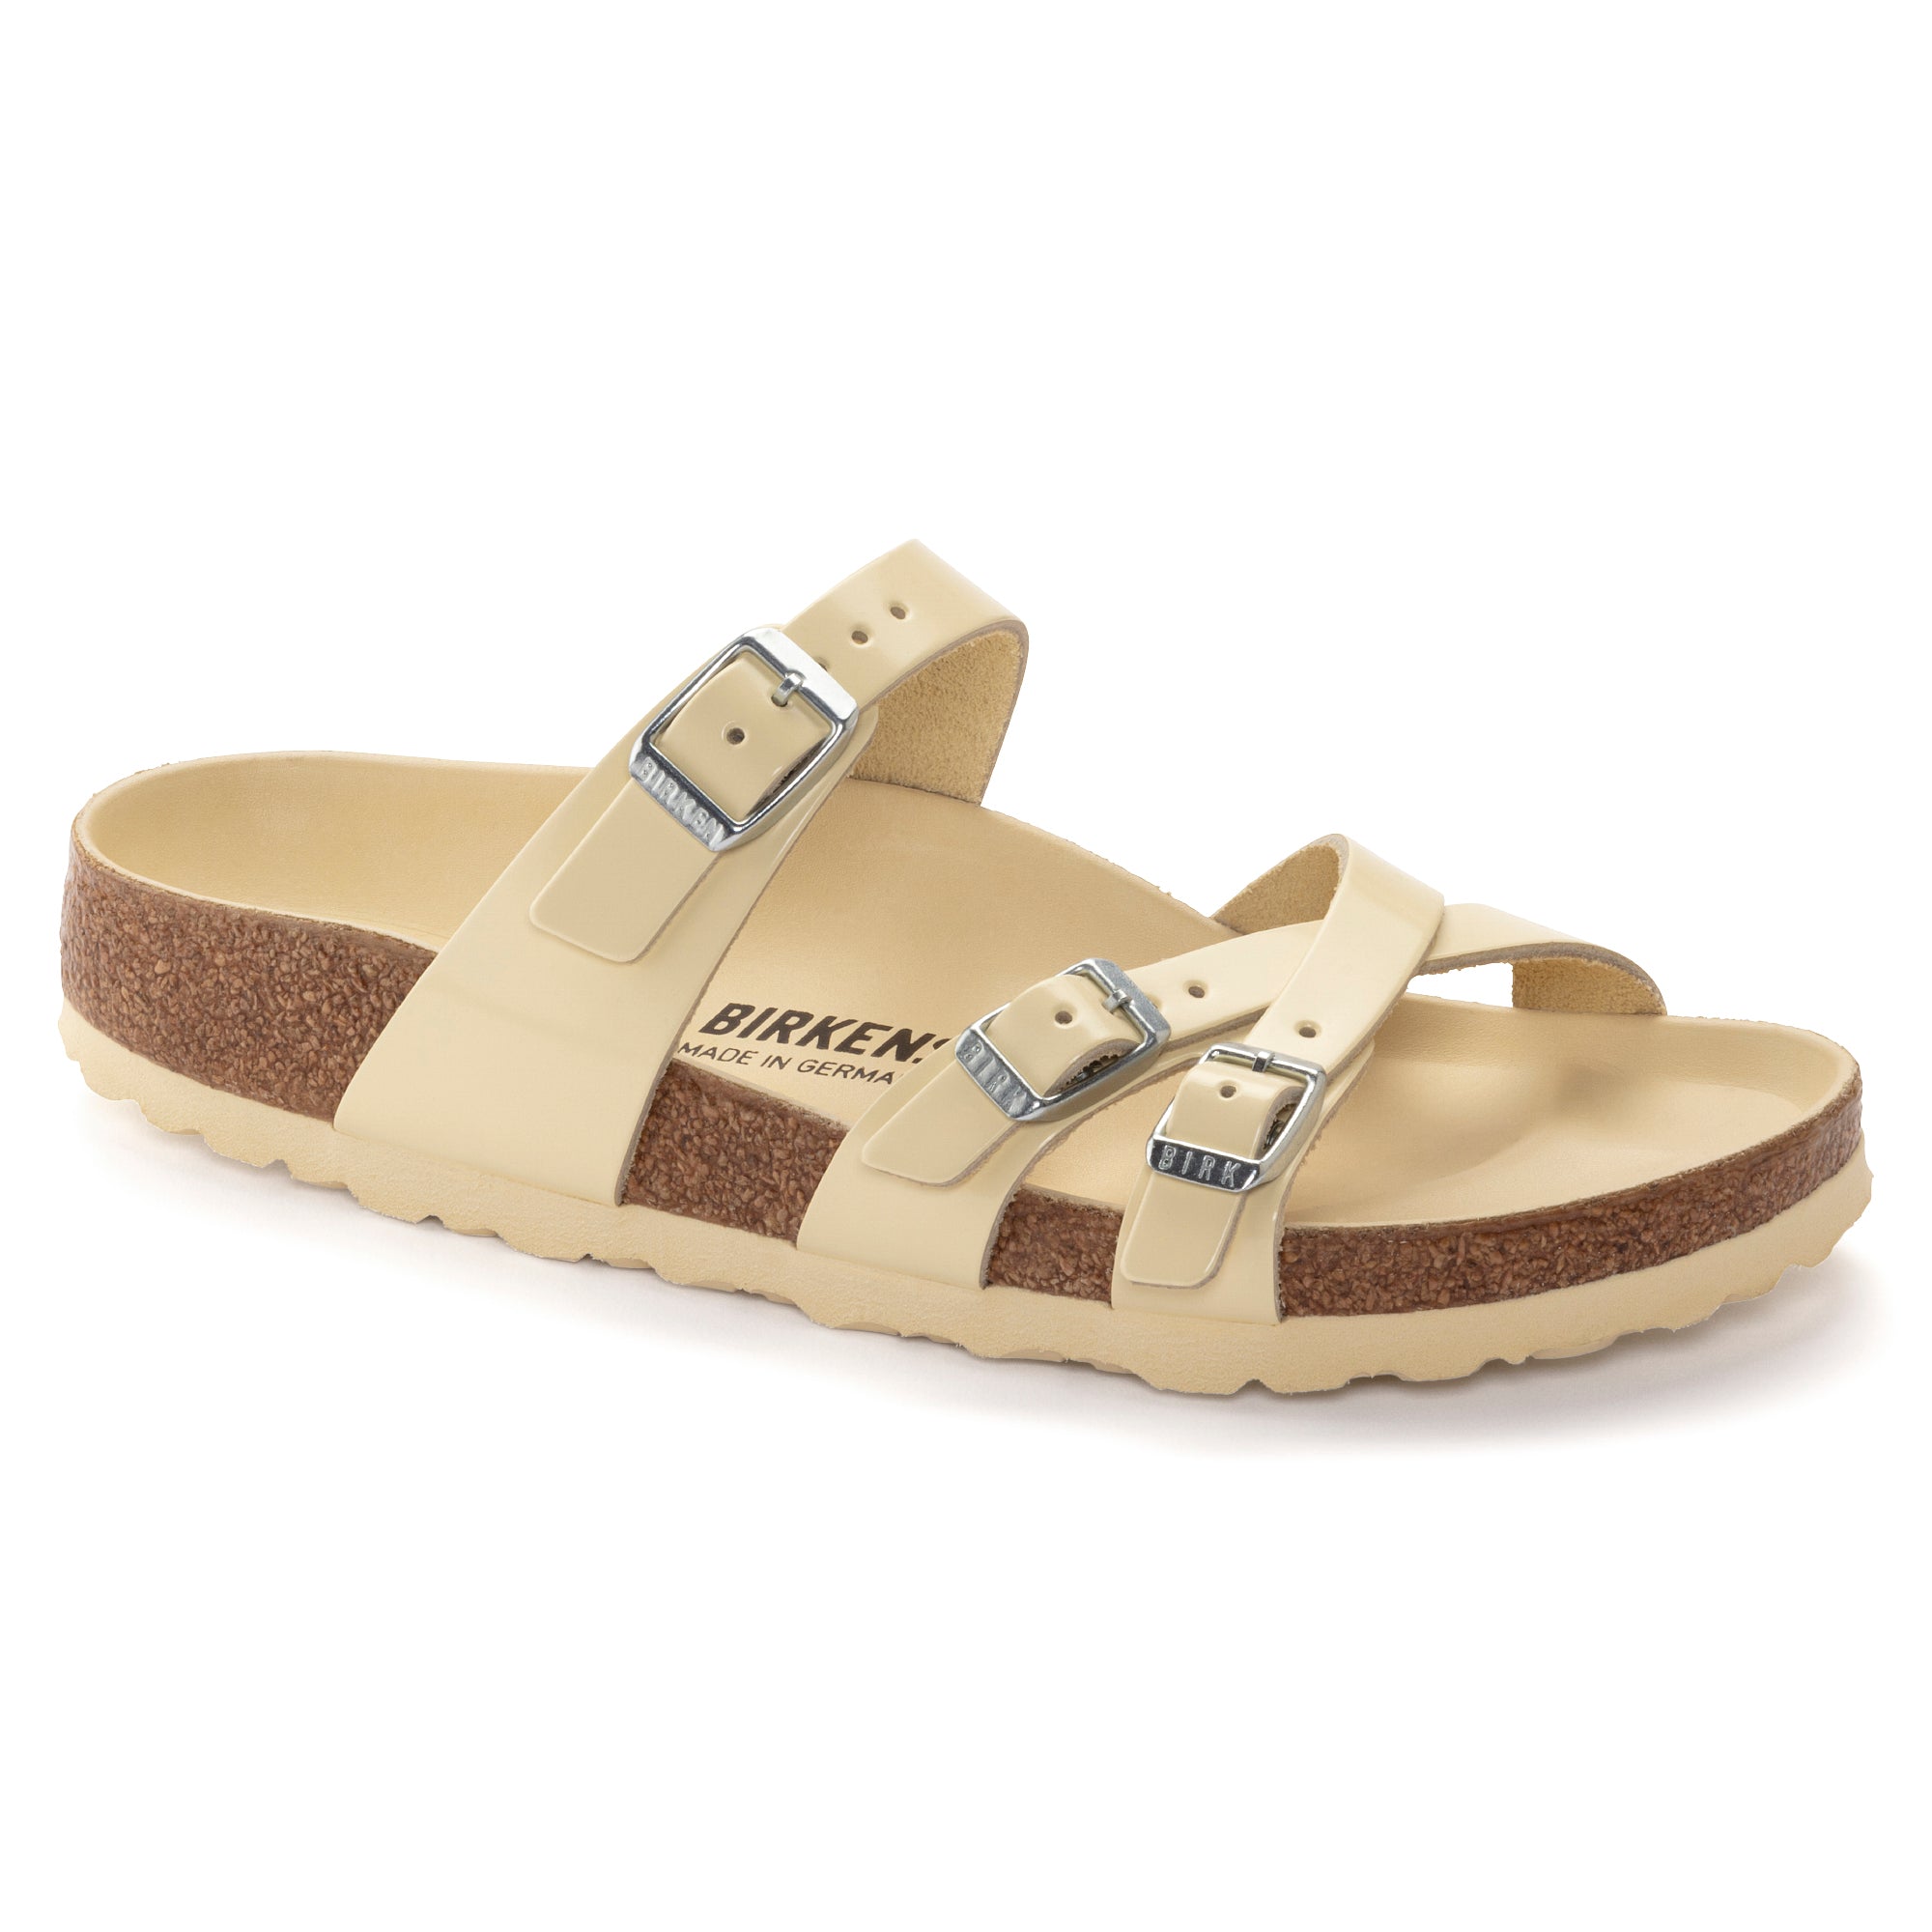 Birkenstock Limited Edition Franca Hex butter high shine leather